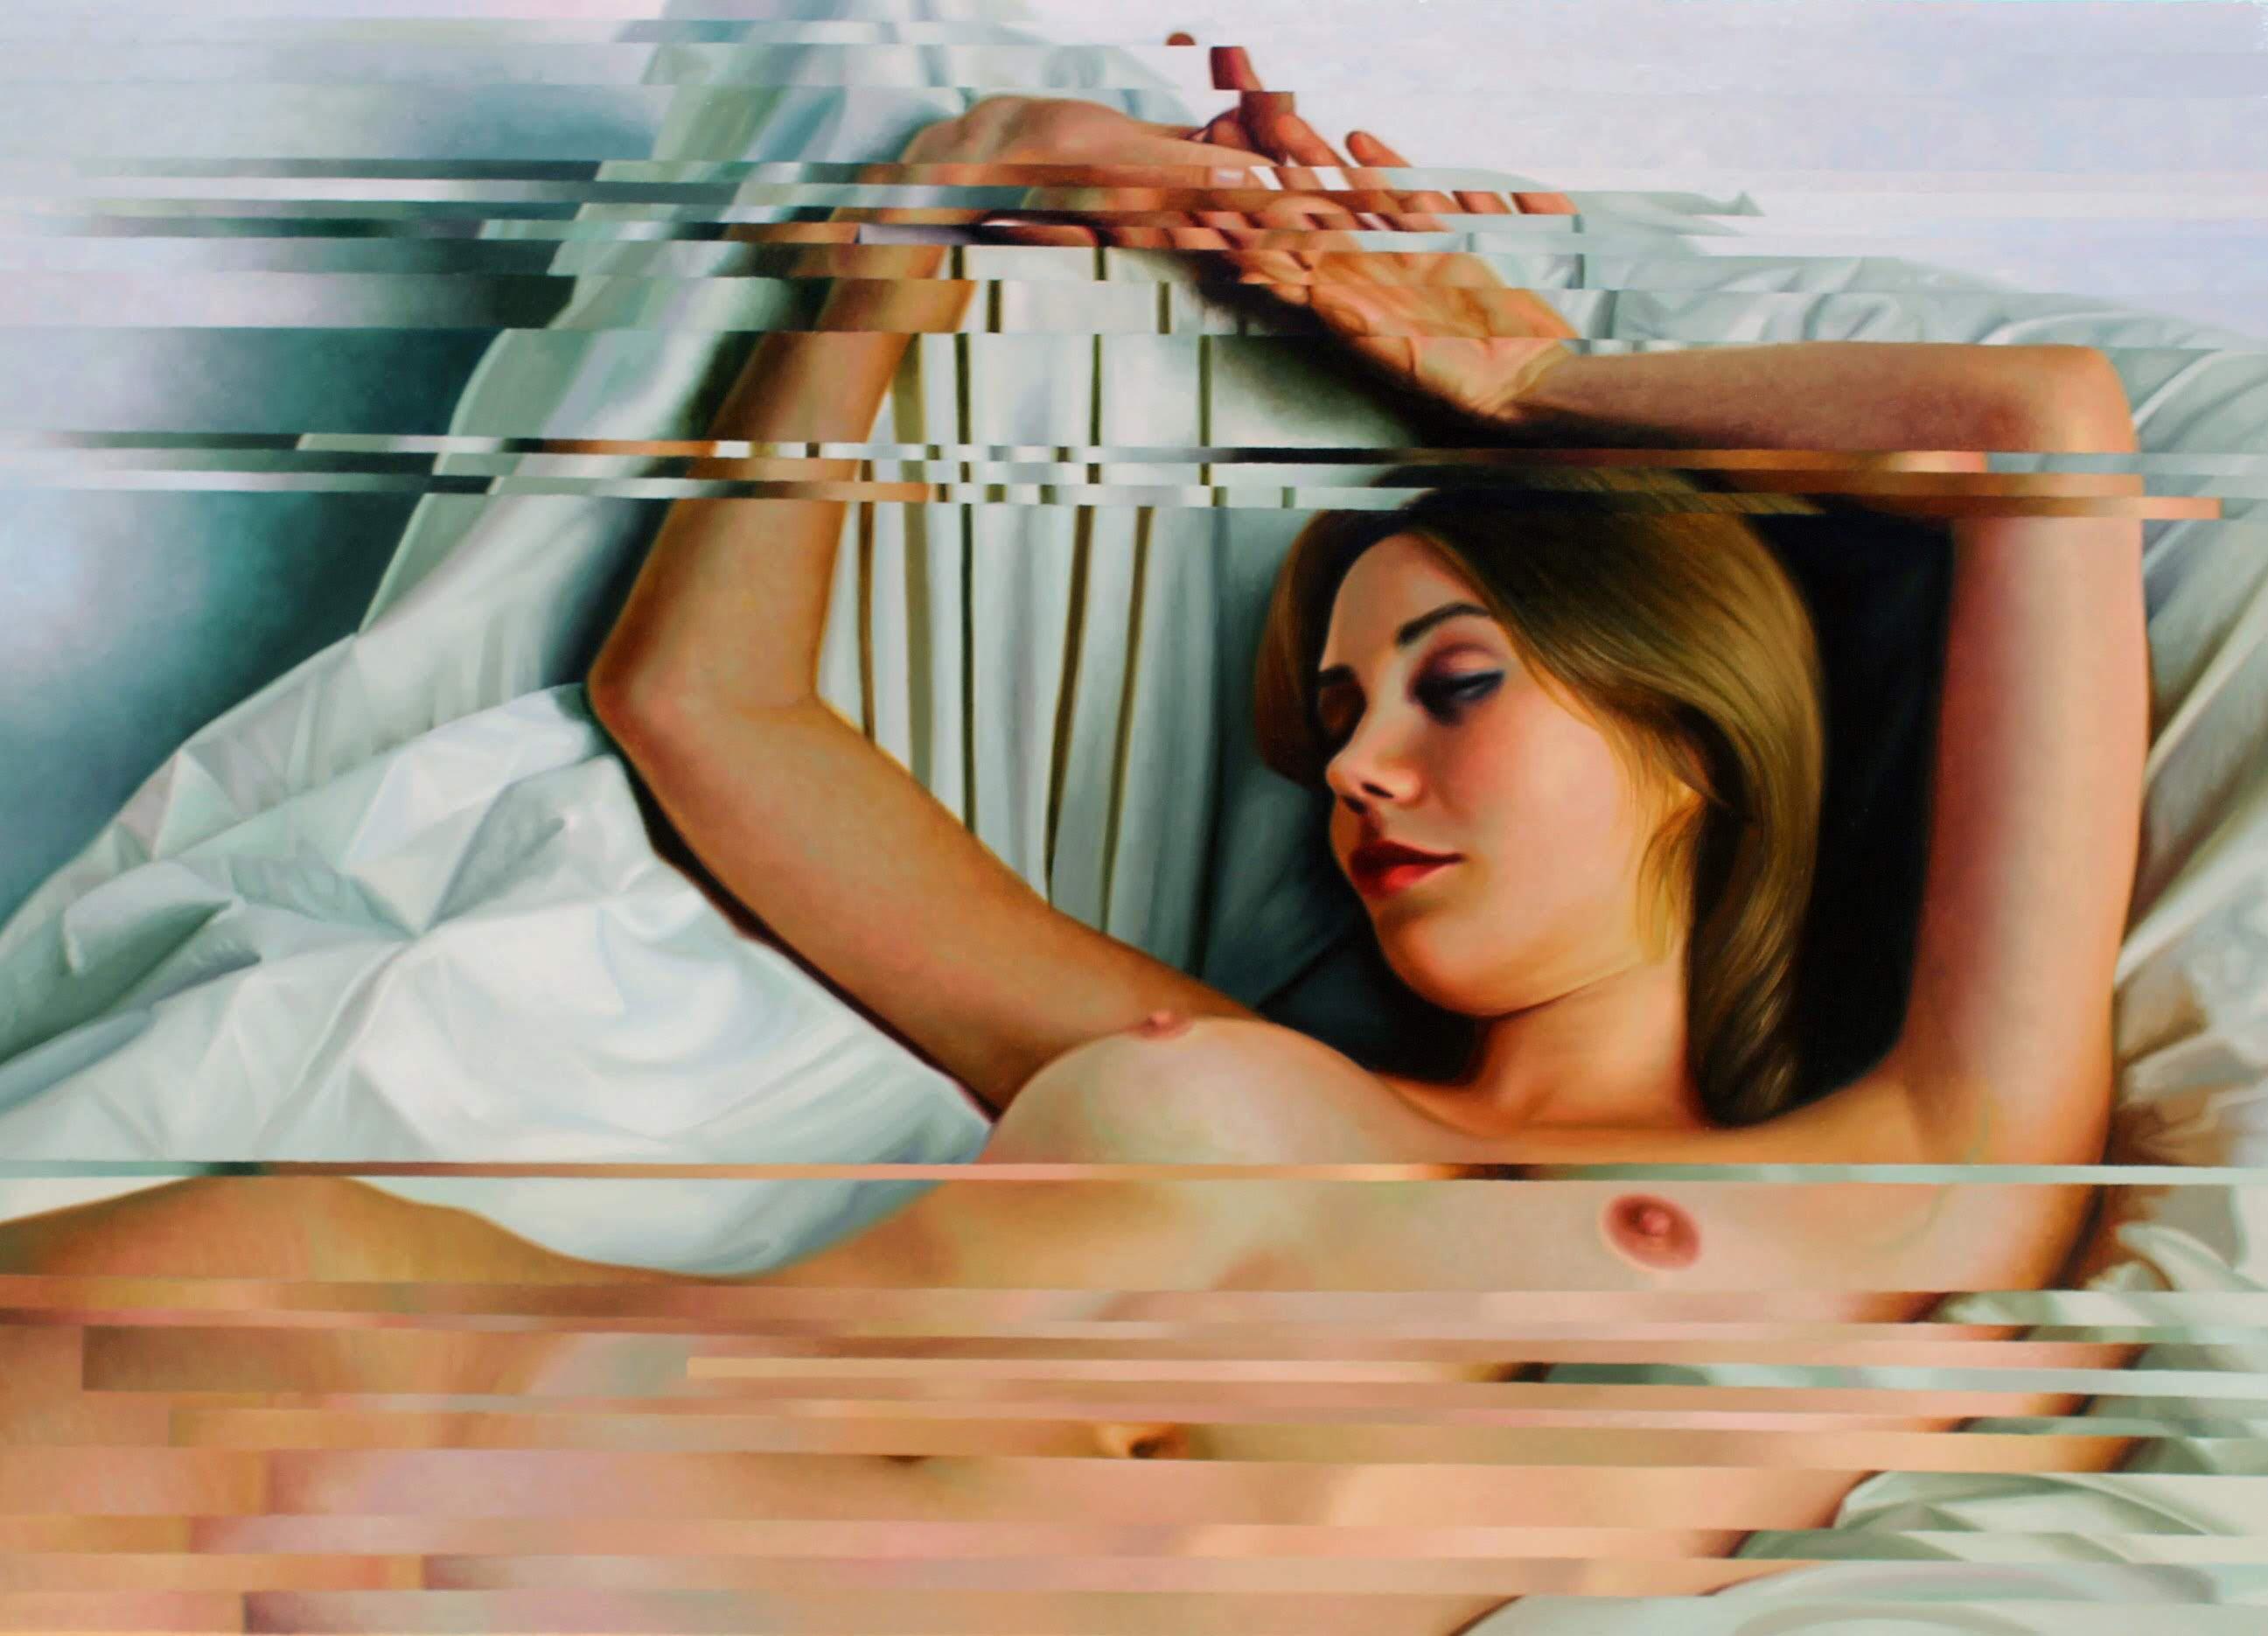 Glitch - Reclining Female Nude, Distorted with Lines, Oil on Canvas - Art by Shuta Ruelas